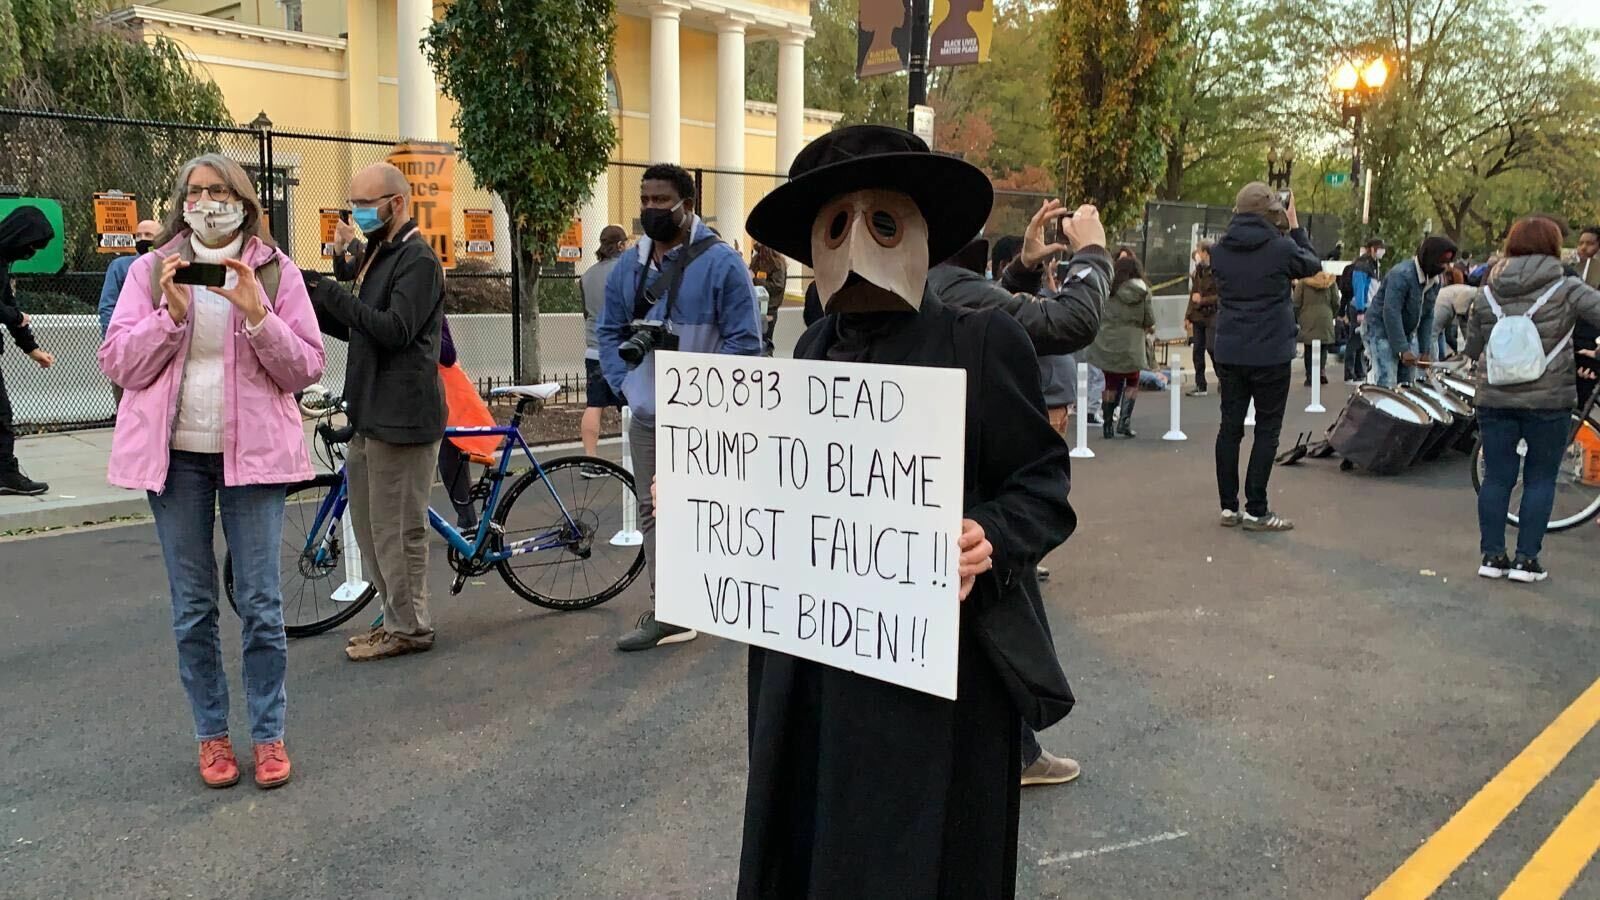 <p>A protester wears a costume and holds a sign denouncing President Donald Trump.</p>
